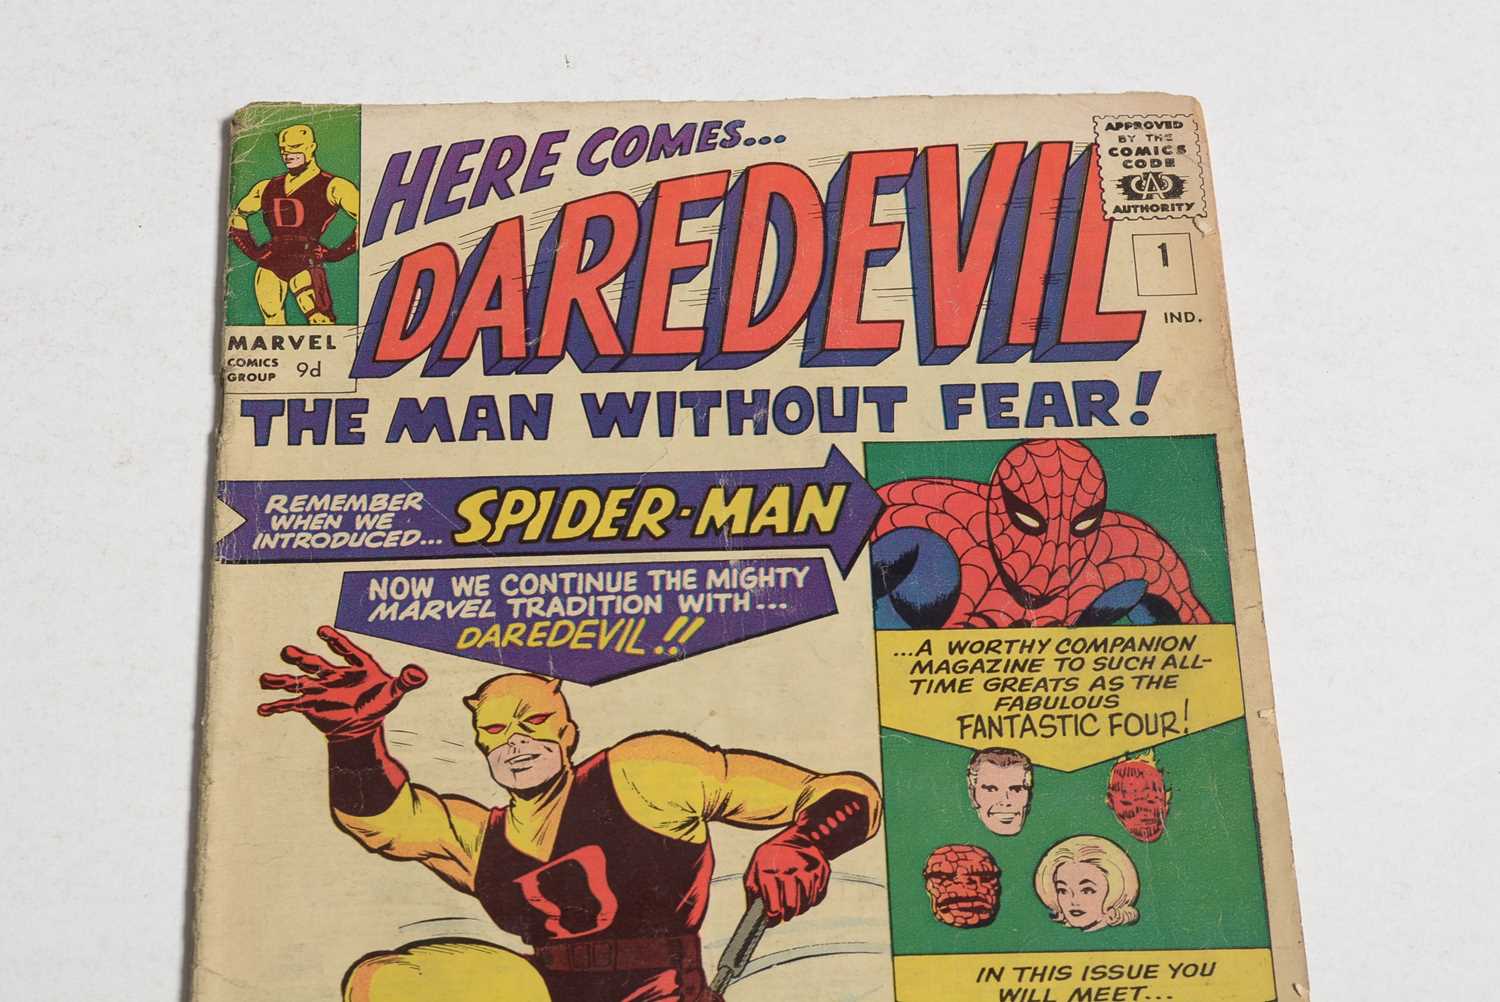 Daredevil No. 1 by Marvel Comics - Image 3 of 8